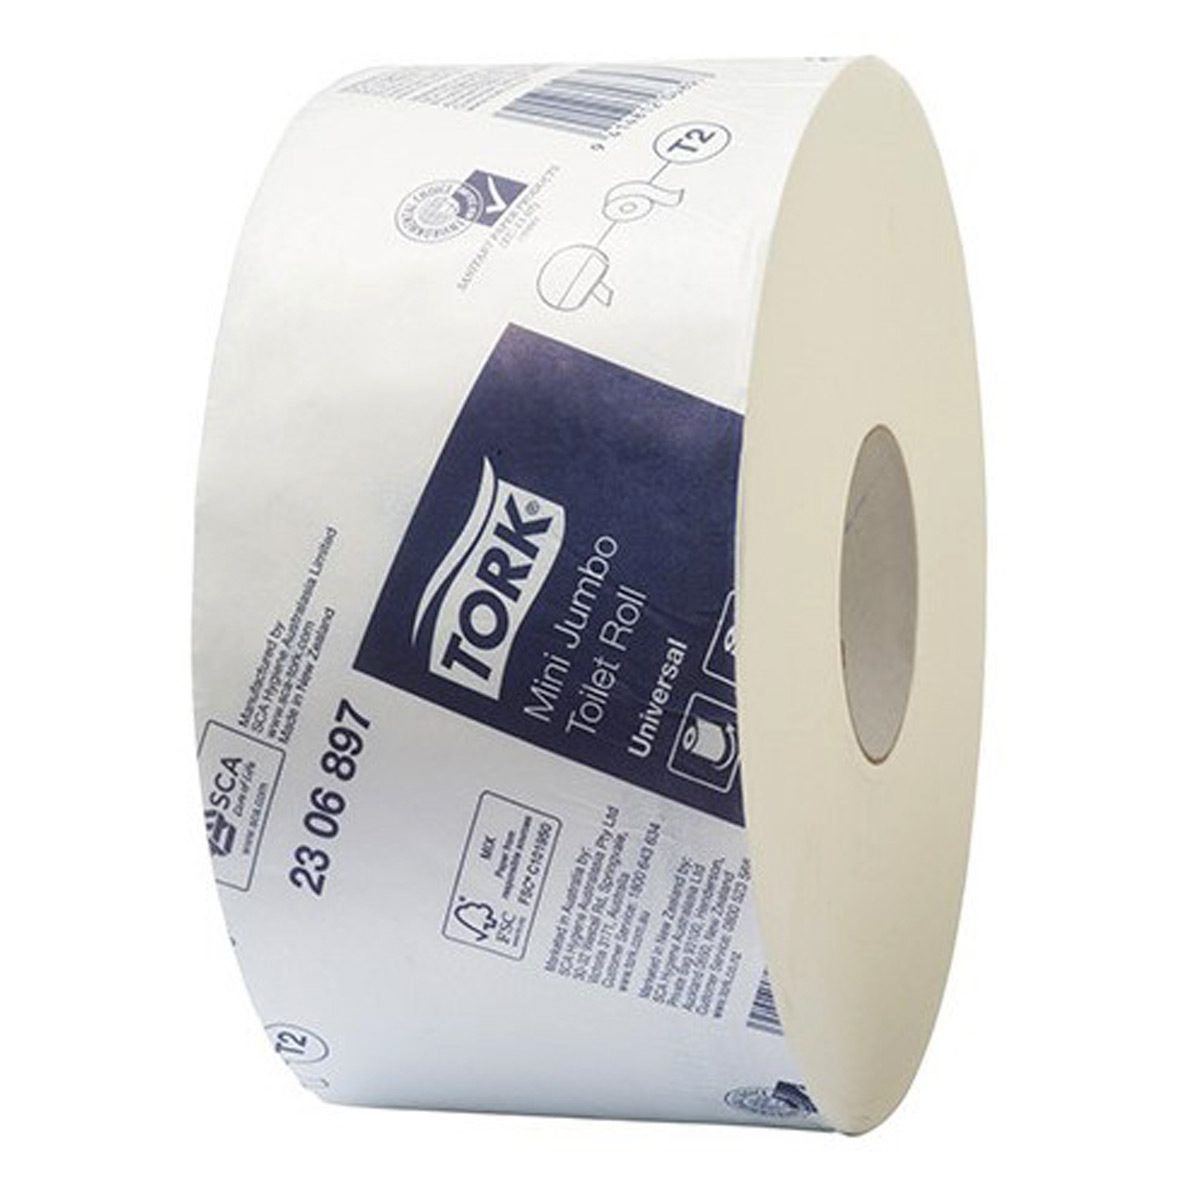 paper-products-toilet-paper-tork-toilet-paper-mini-jumbo-1-ply-400m-12-rolls-t2-vjs-most-economical-refills-in-range-providing-good-quality-paper-affordable-price-distributors-2306897